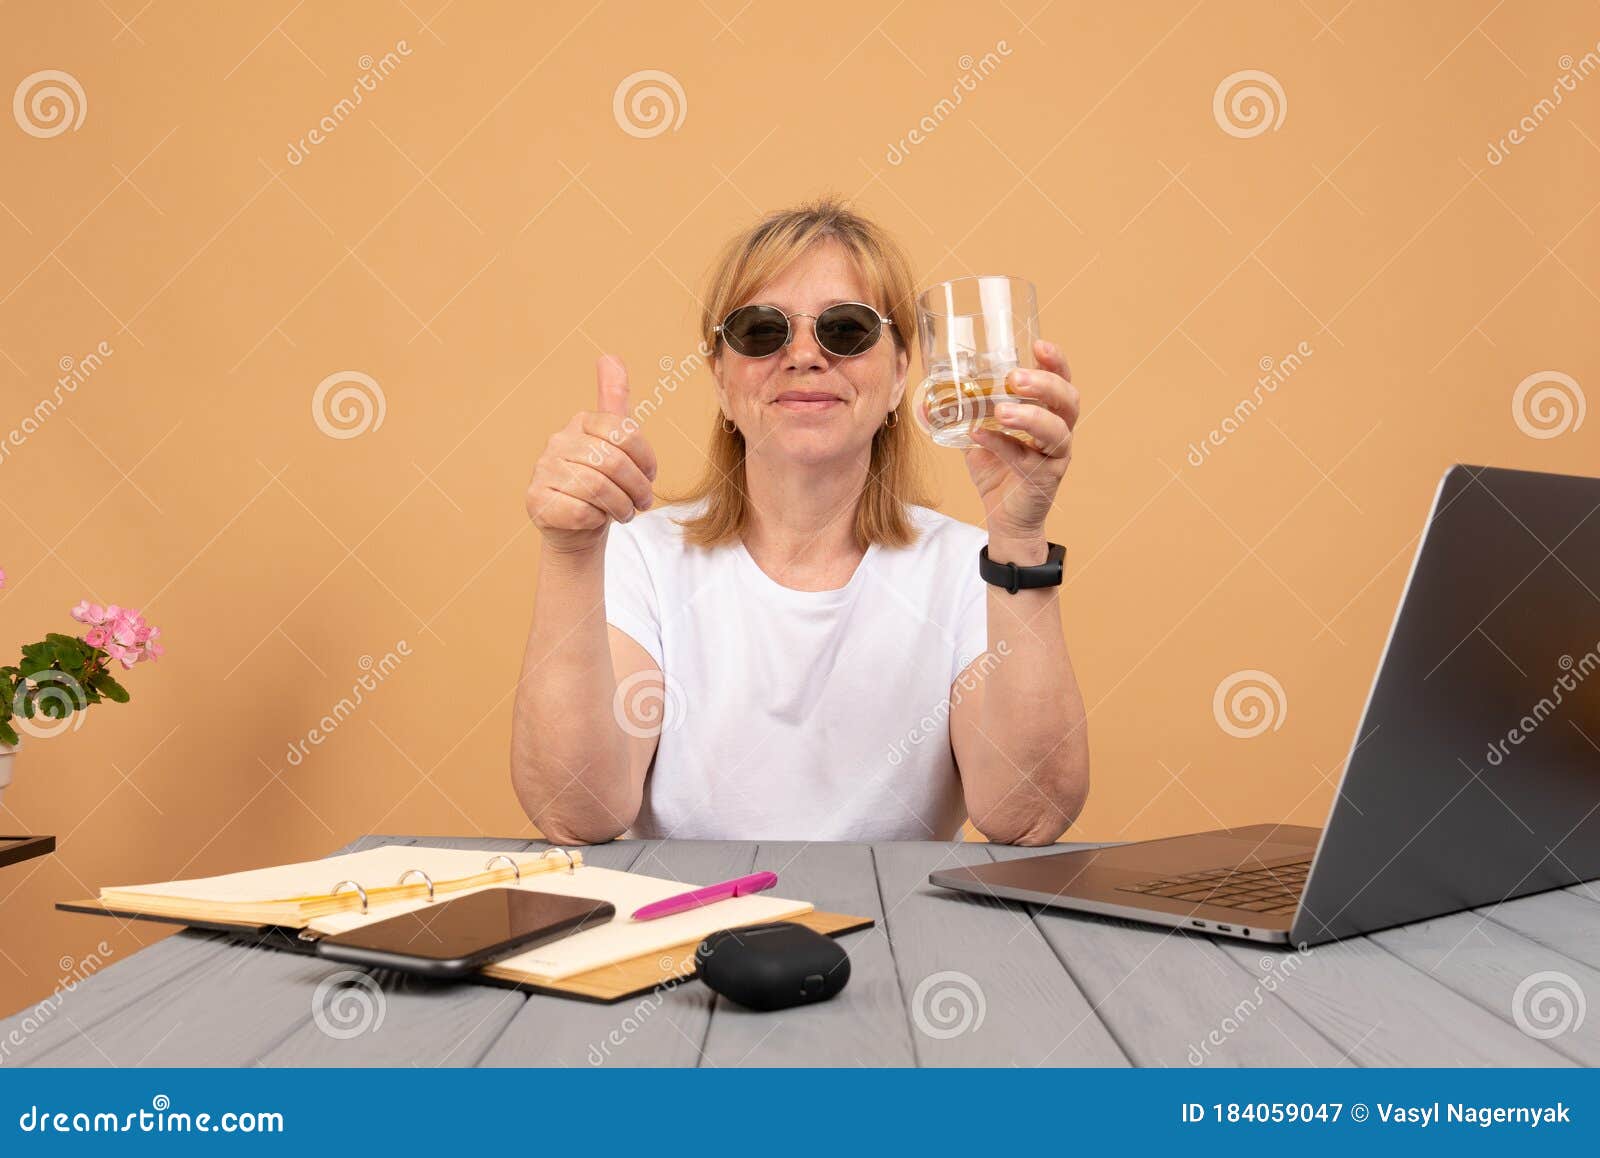 Happy Drunk Elderly Woman In Sunglasses Drinking Whiskey And Working On 